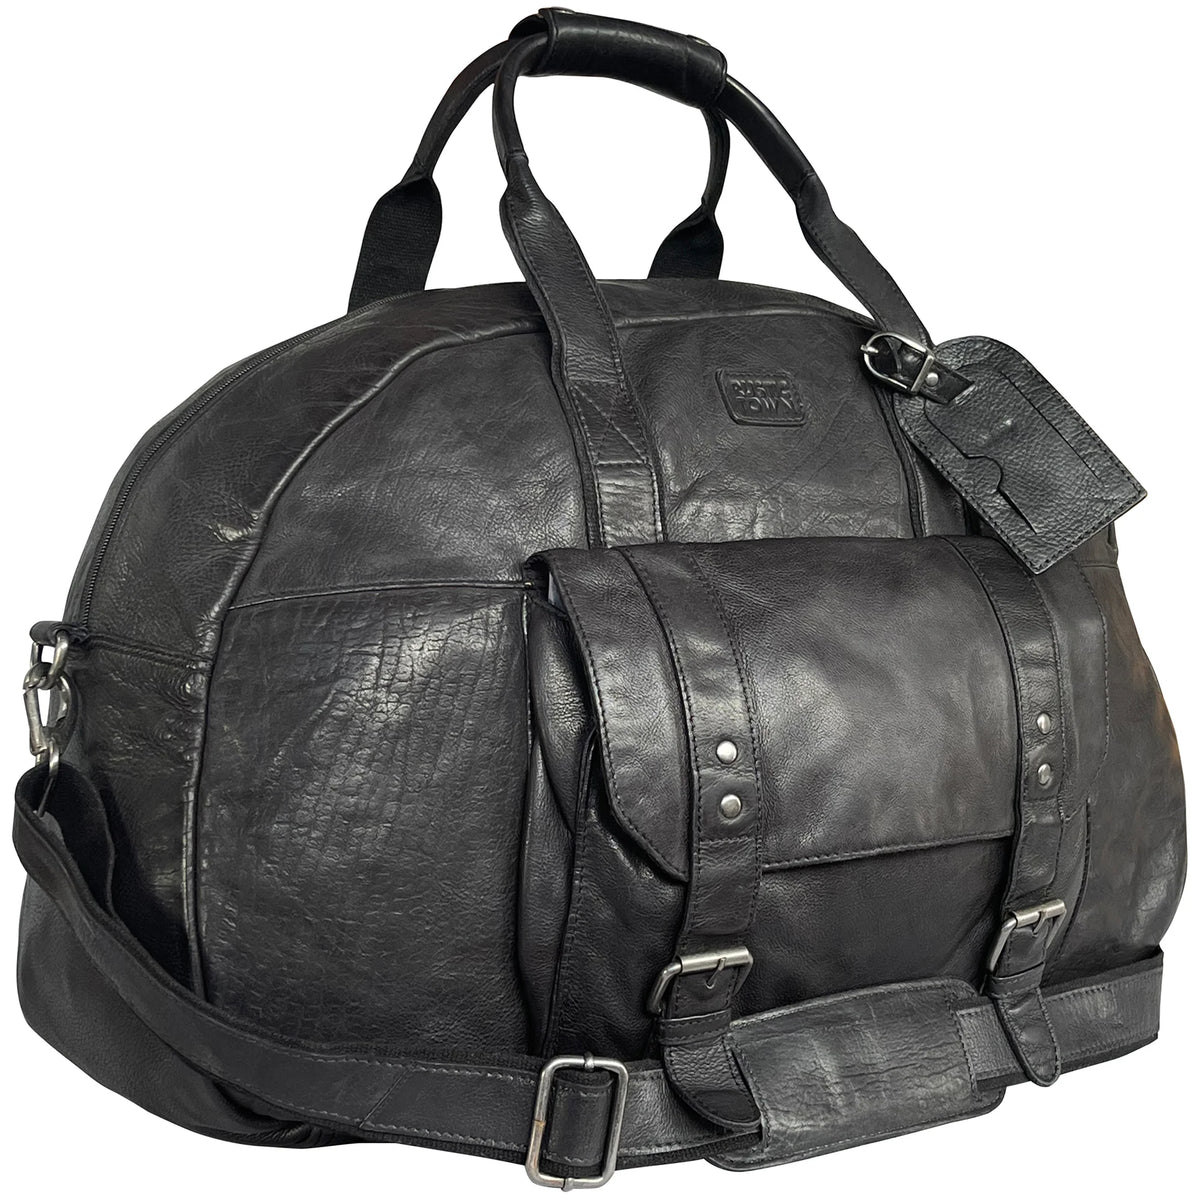 Leather Duffel Bags for Men - Airplane Underseat Carry on Luggage by RusticTown